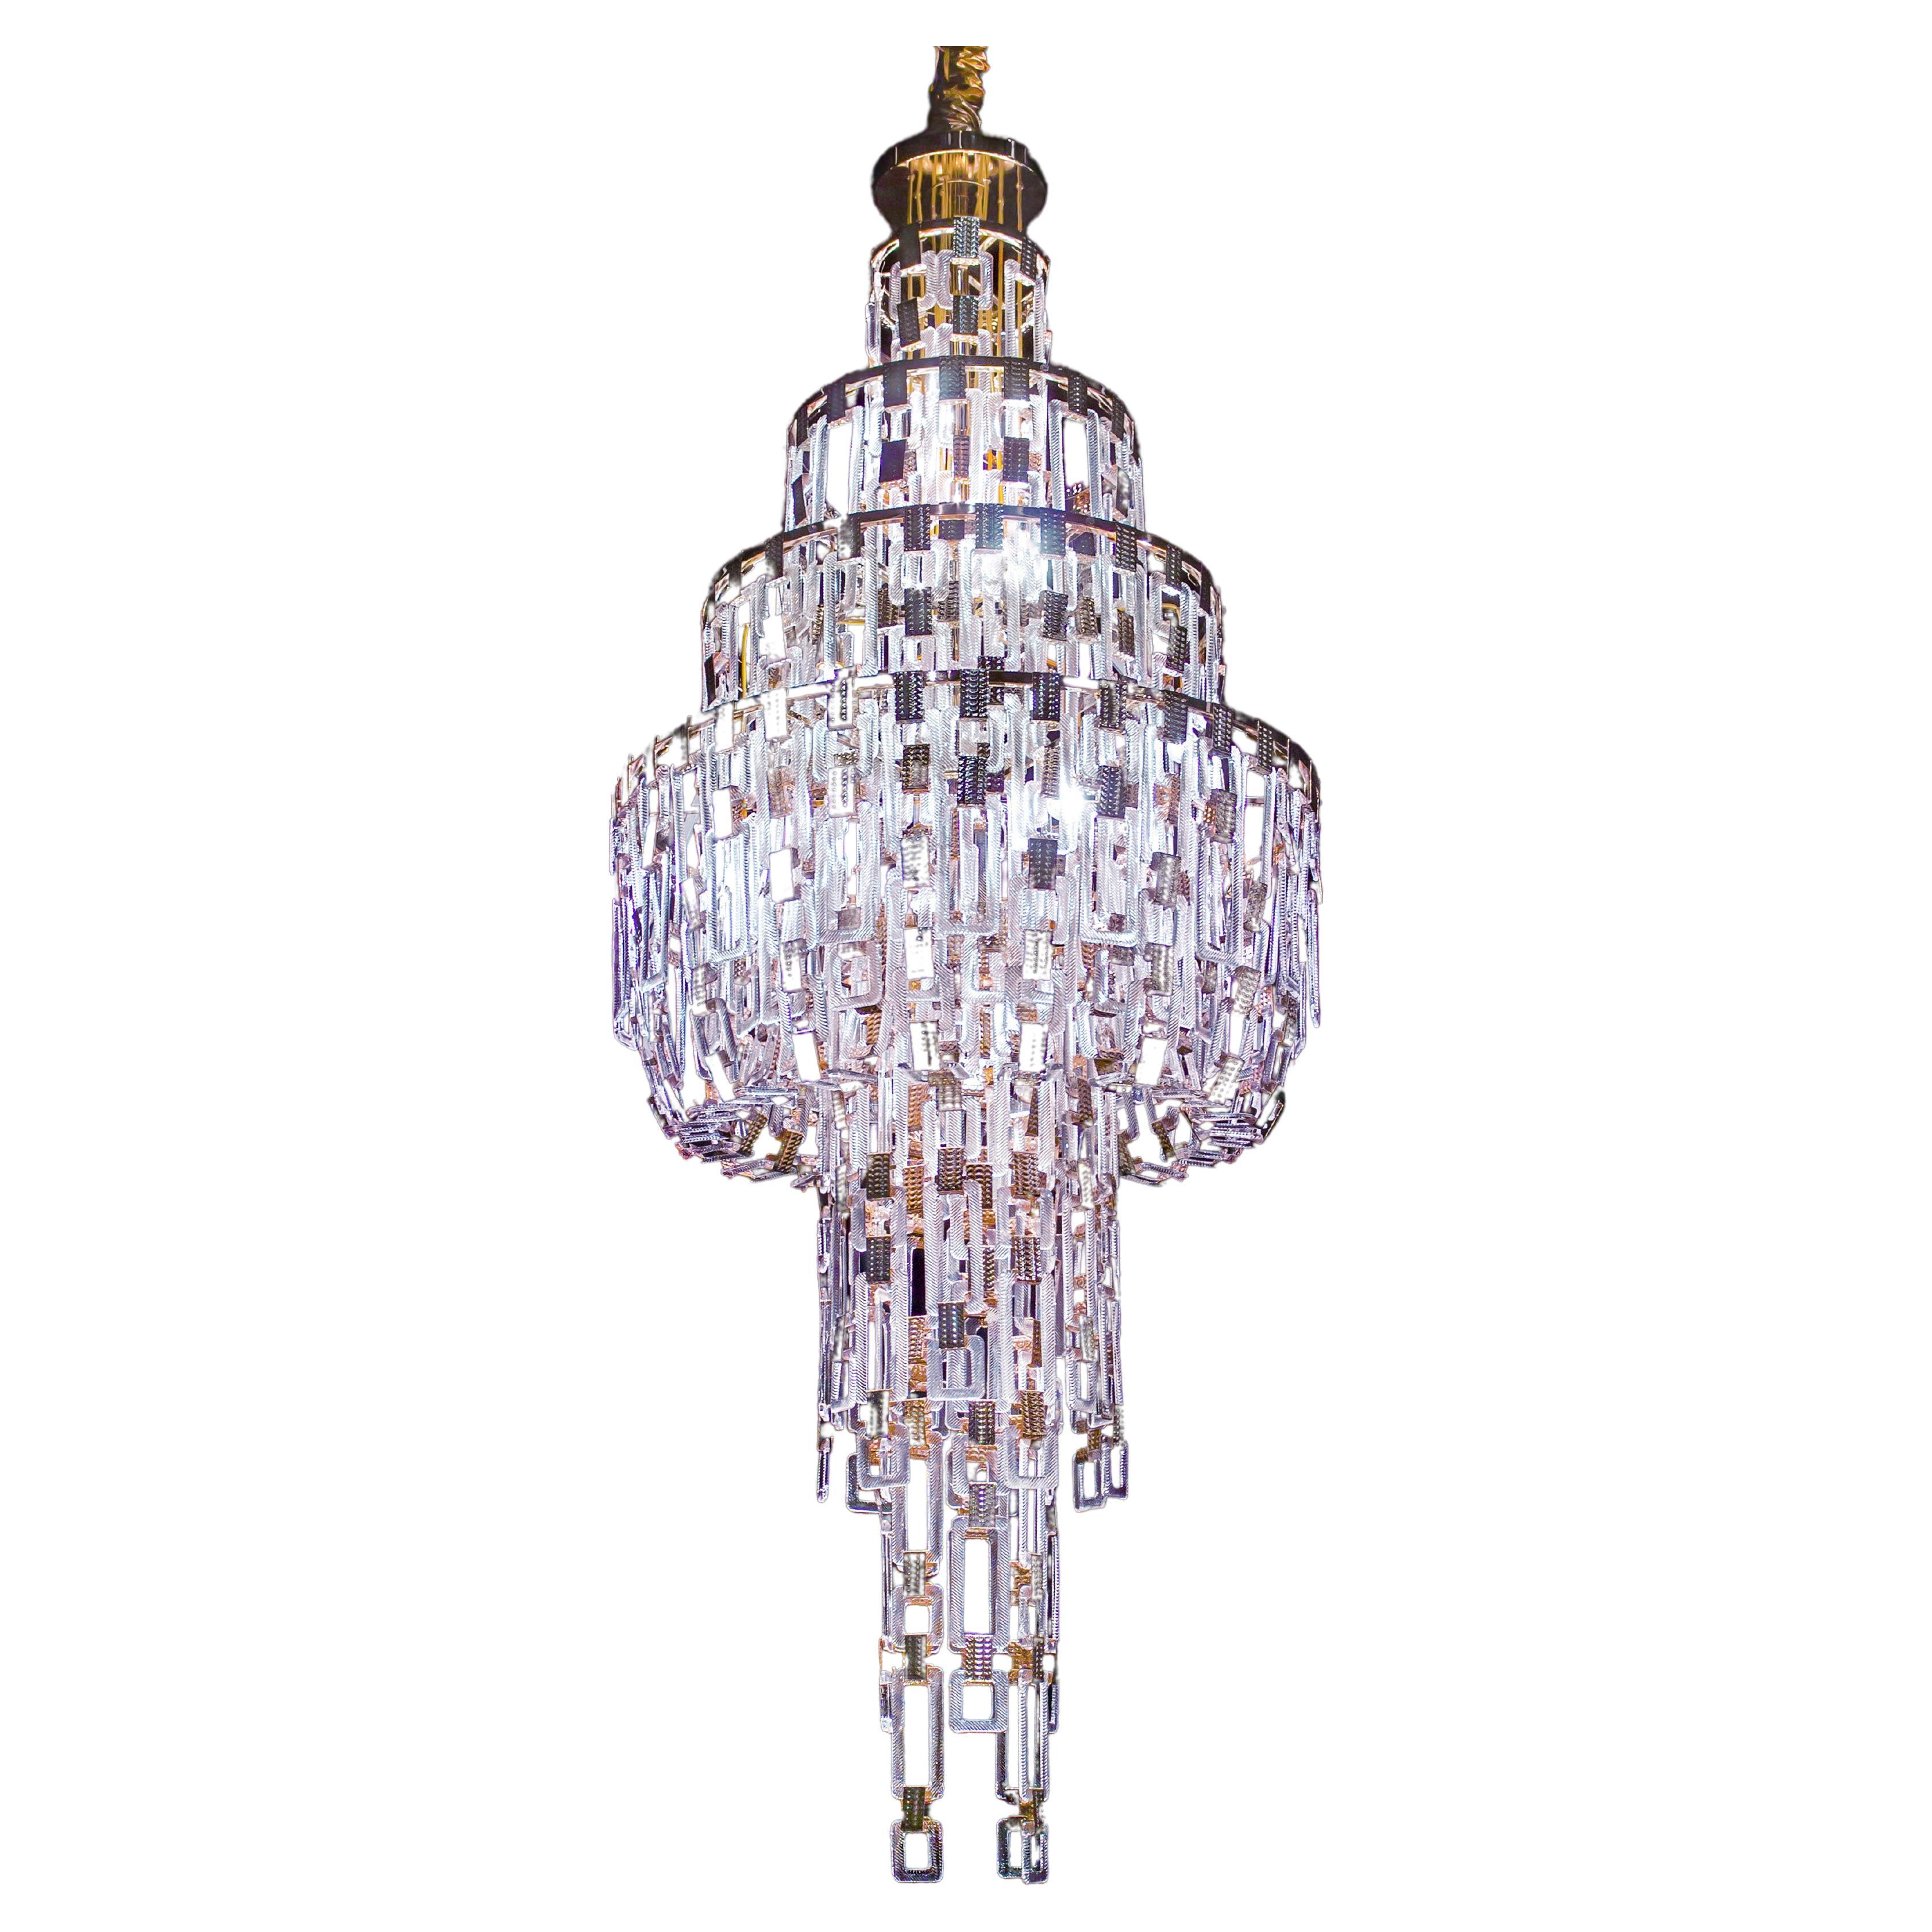 Artistic Handmade Chandelier, Belle Epoque by A. Lohman and La Murrina For Sale